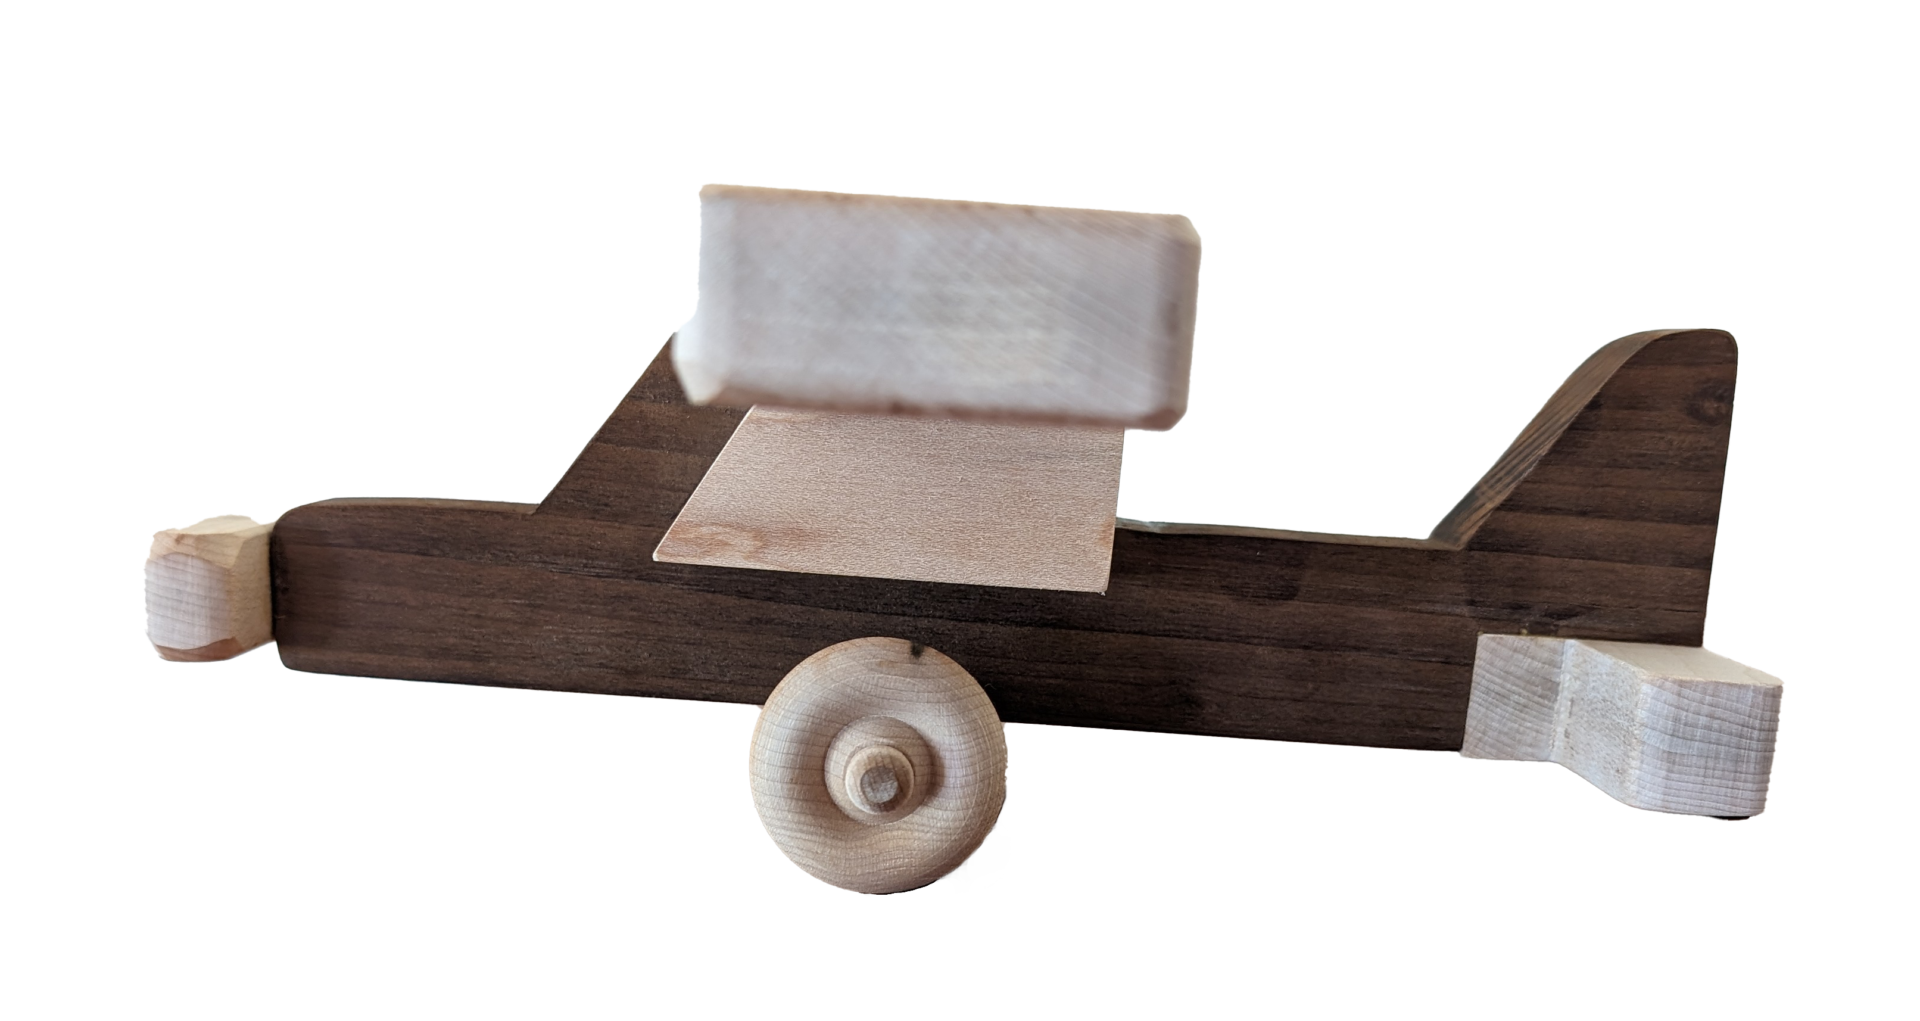 completed wooden toy monoplane